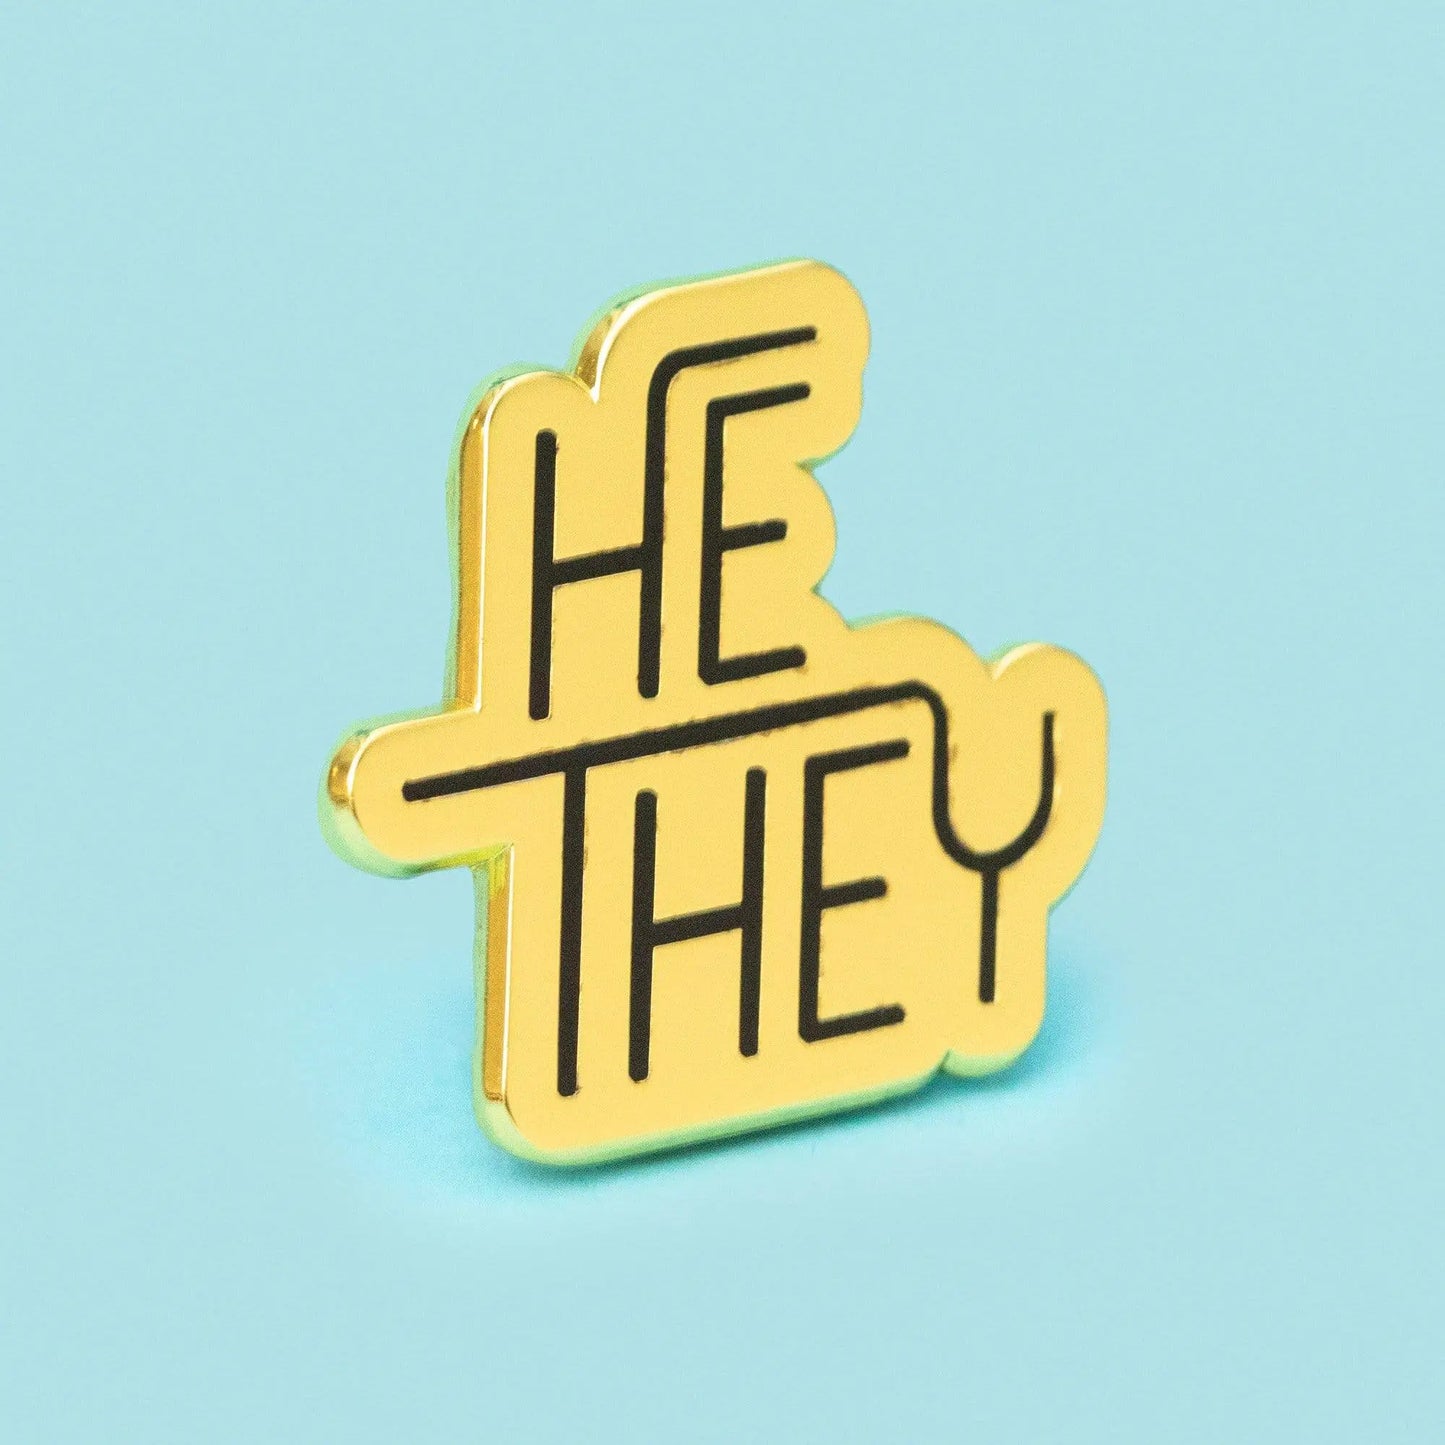 Introduce yourself with these Pronoun Pins! These little pins are perfect for your lapel, bag, or jacket.